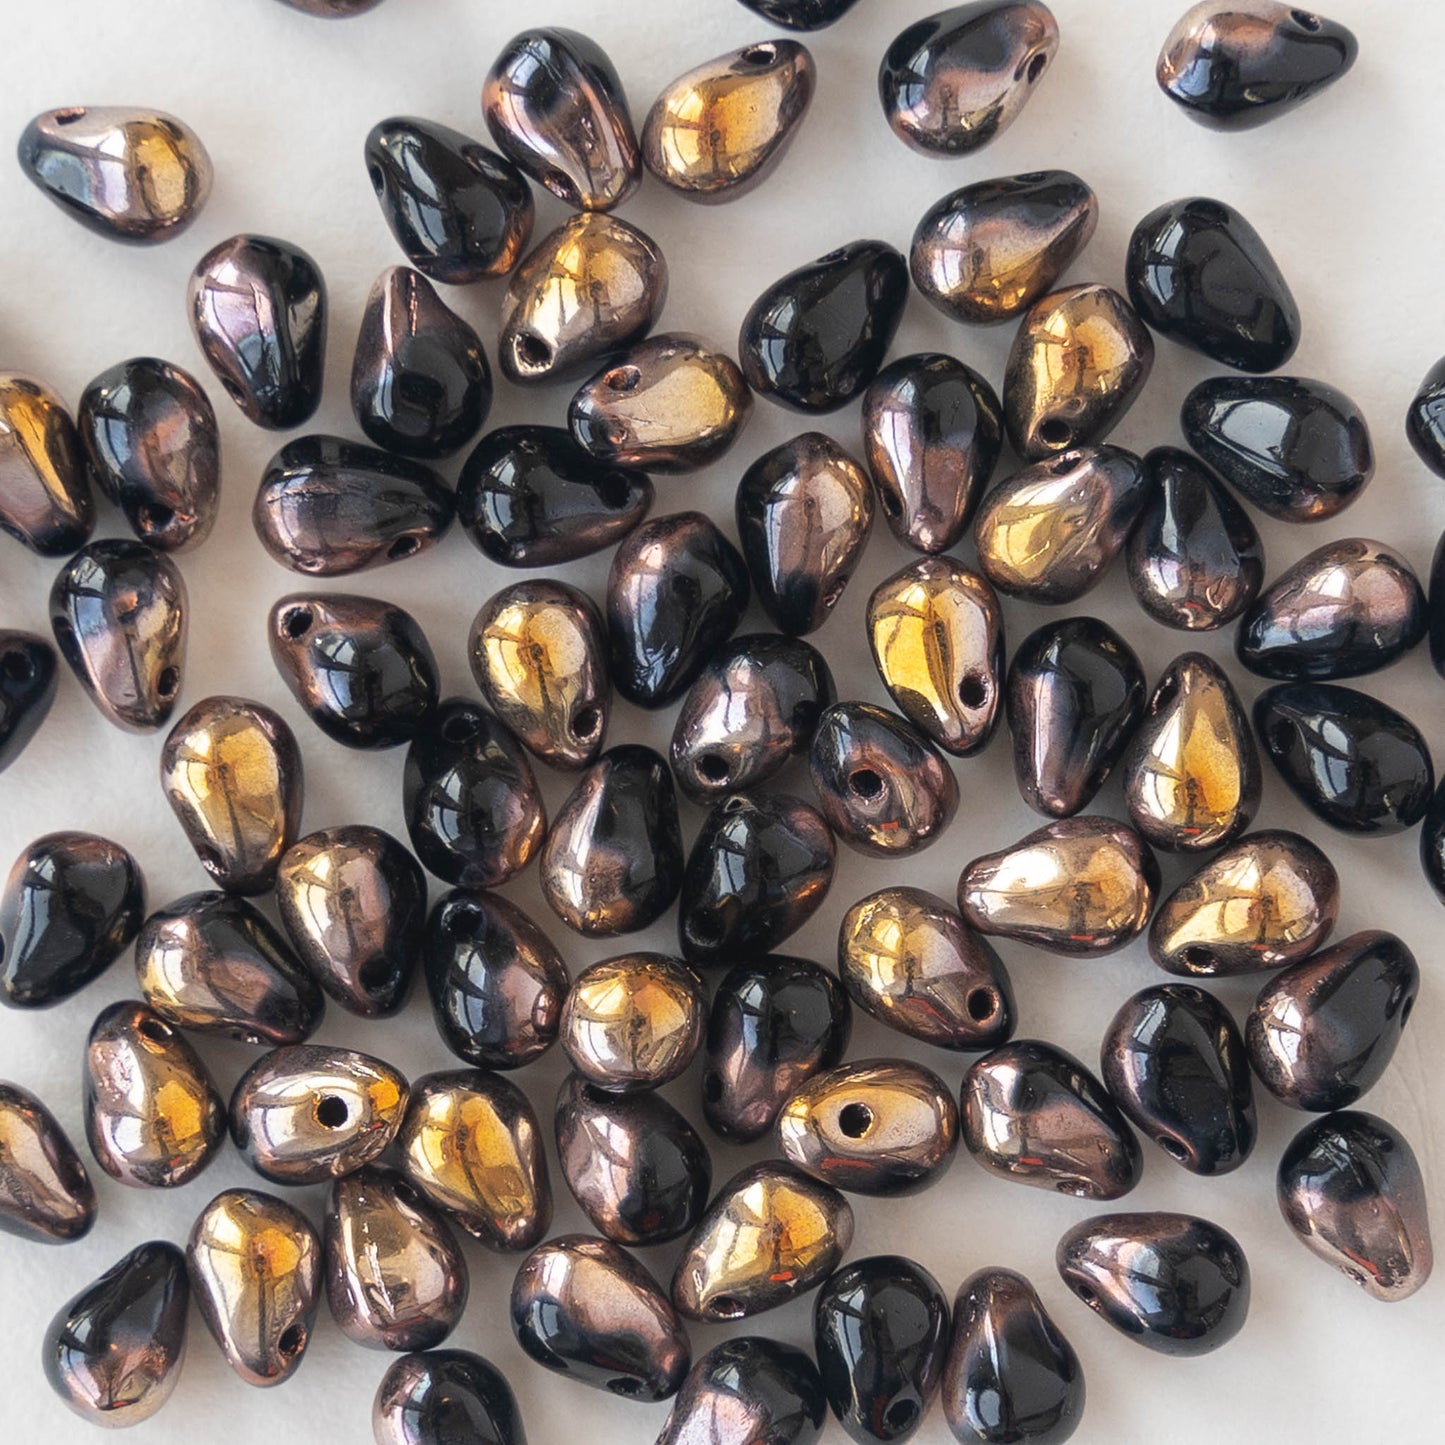 4x6mm Glass Teardrop Beads - Black with Gold - 100 Beads